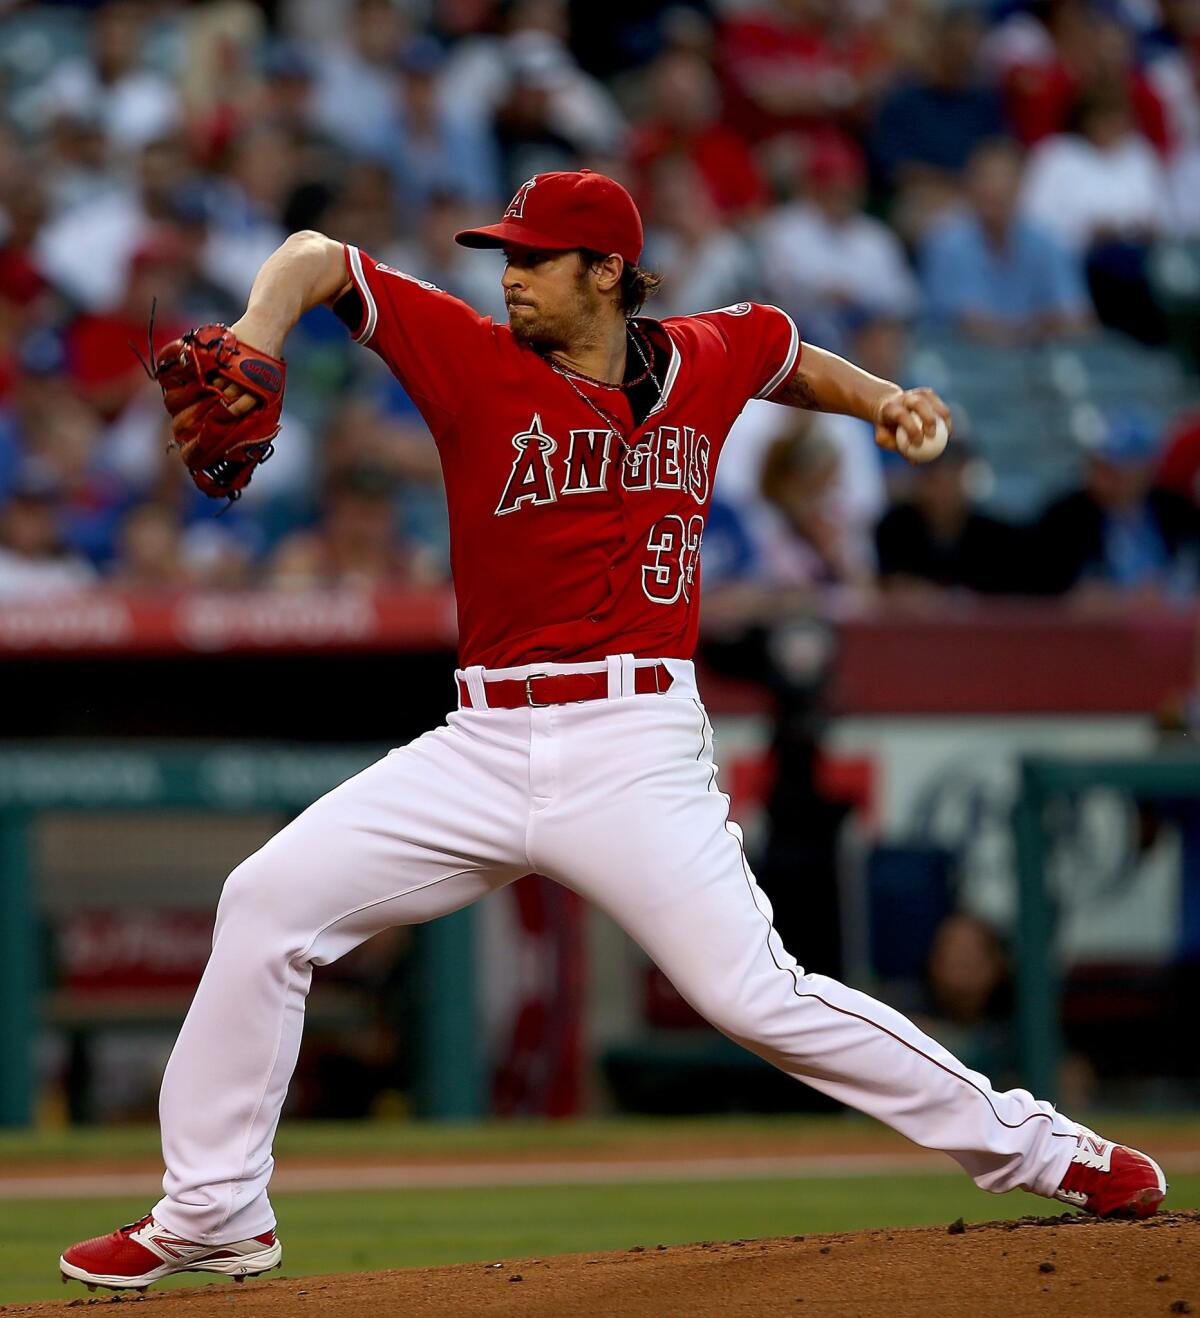 C.J. Wilson gave up four earned runs on six hits in 5 2/3 innings of work for the Angels against the Dodgers on Thursday at Angel Stadium.